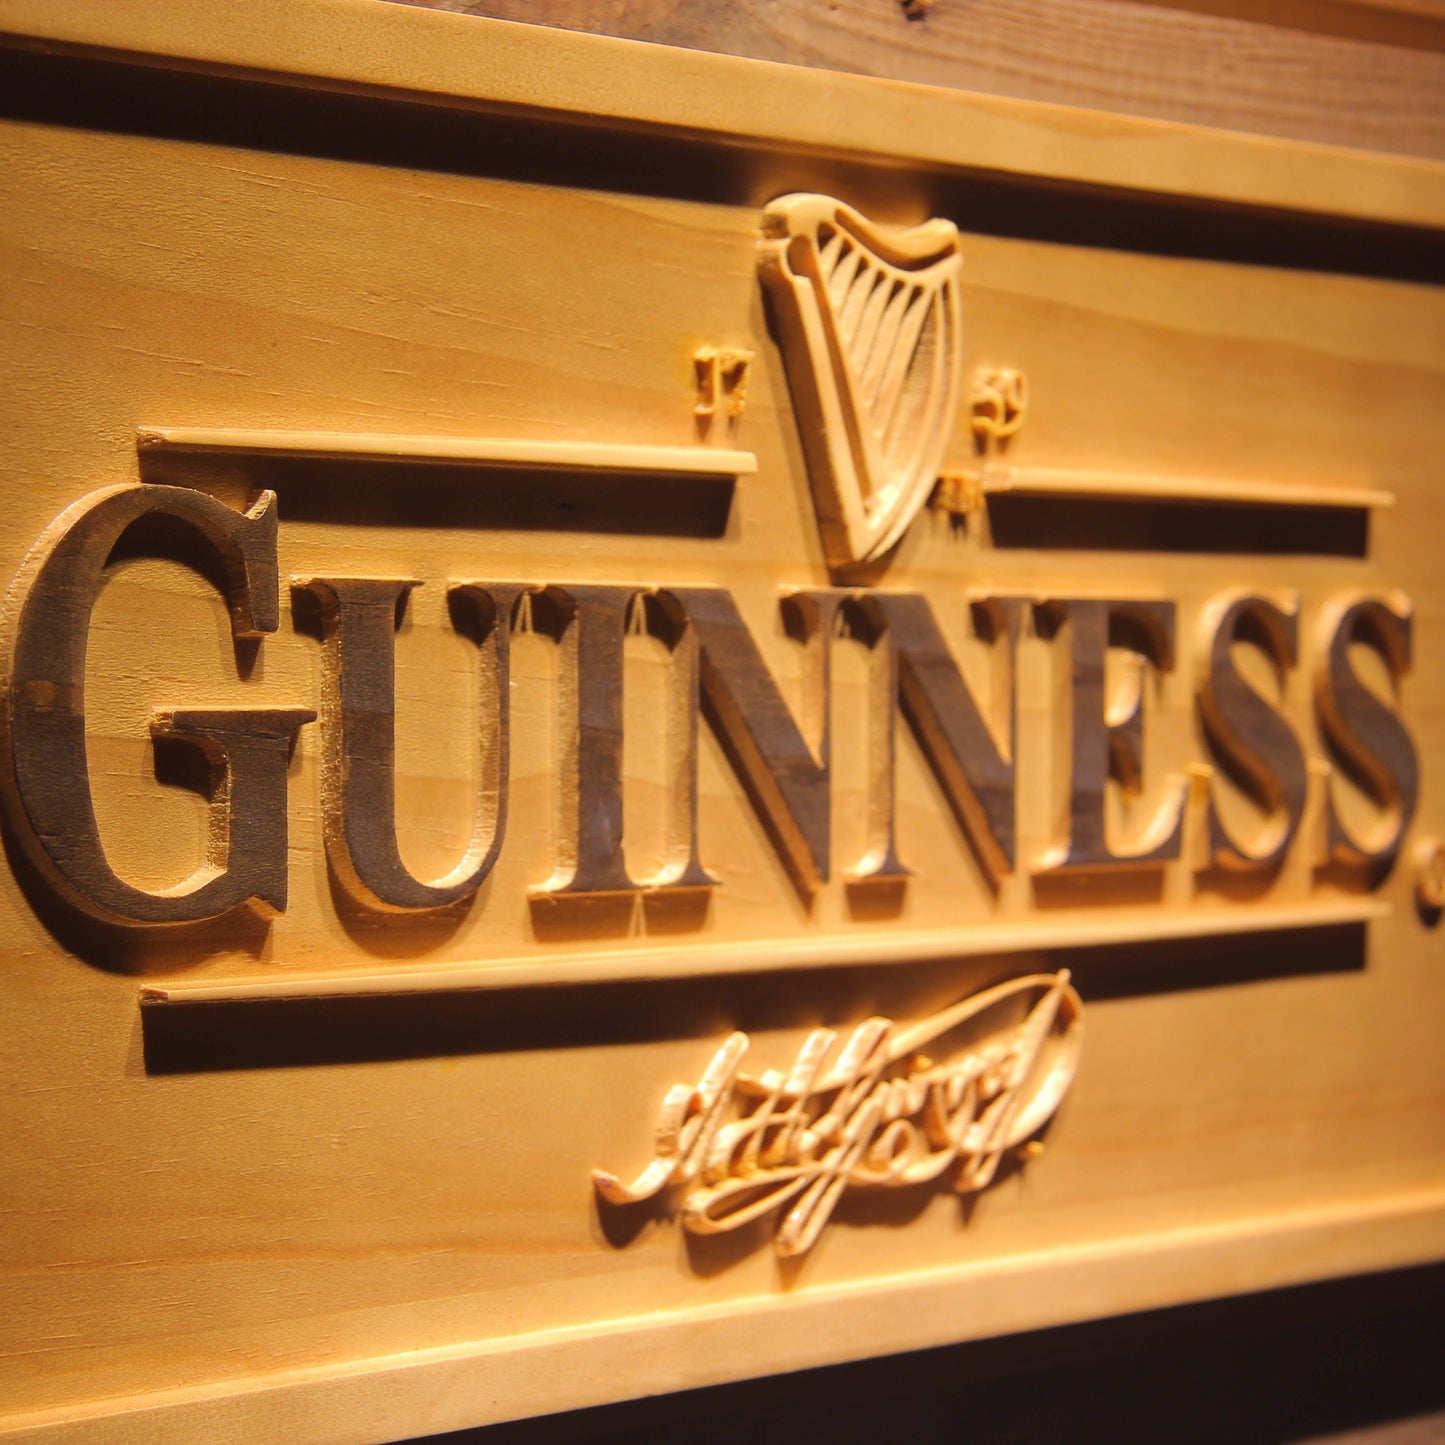 GUINNESS Ale  3D Wooden Signs by Woody Signs Co. - Handmade Crafted Unique Wooden Creative